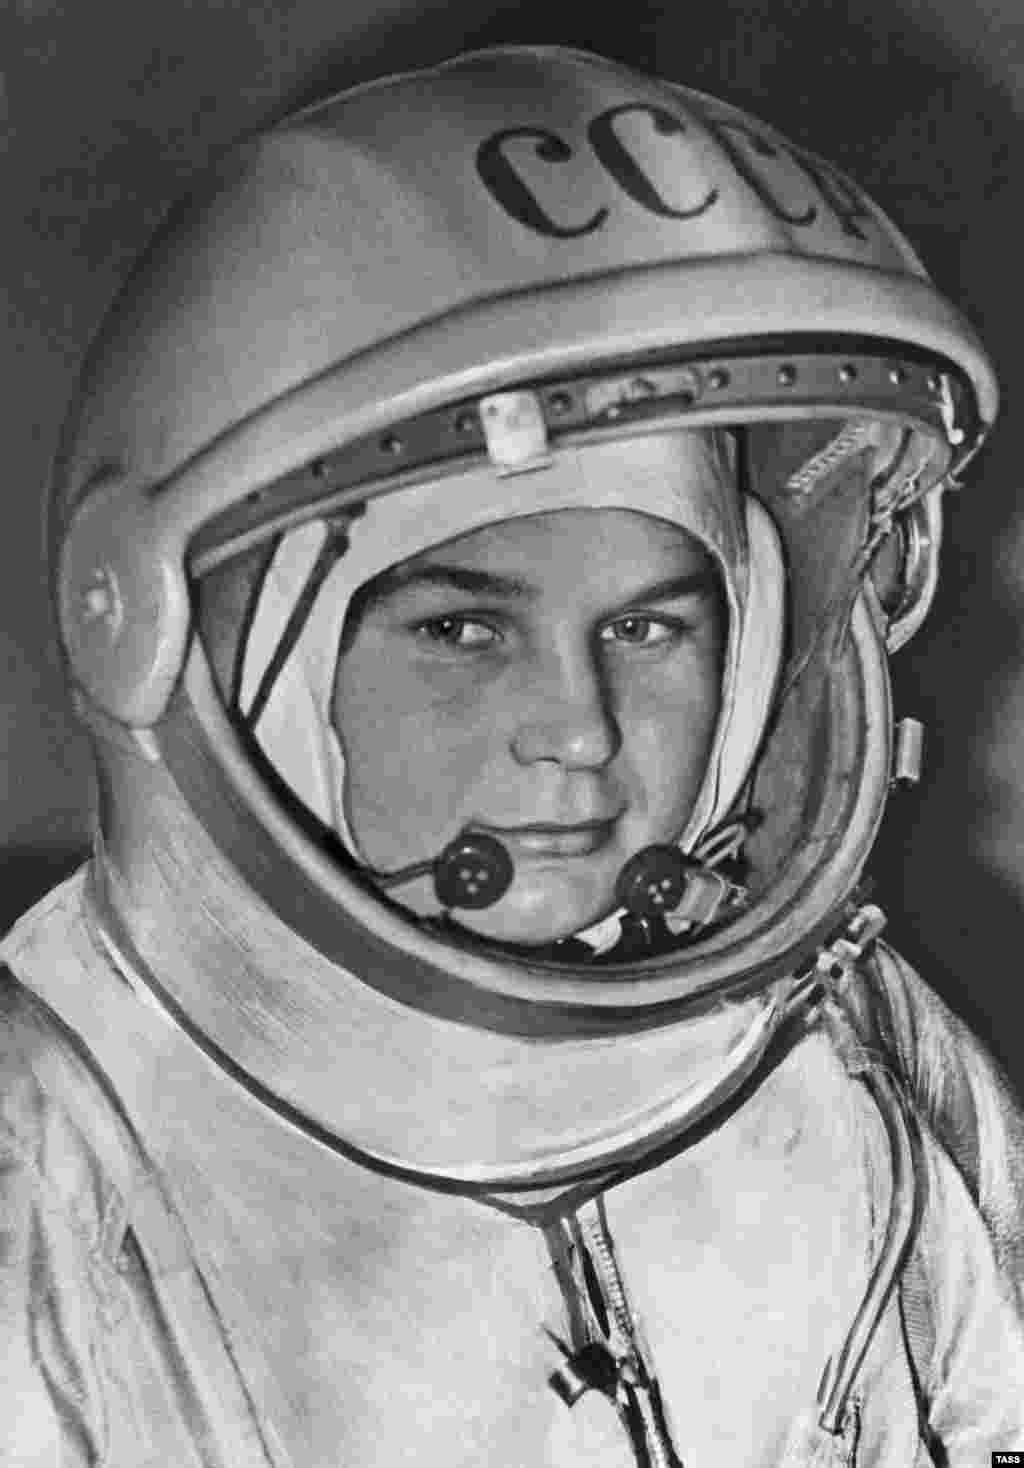 Tereshkova orbited Earth for more than two days, instantly taking up a place beside Yury Gagarin in the space-race pantheon.